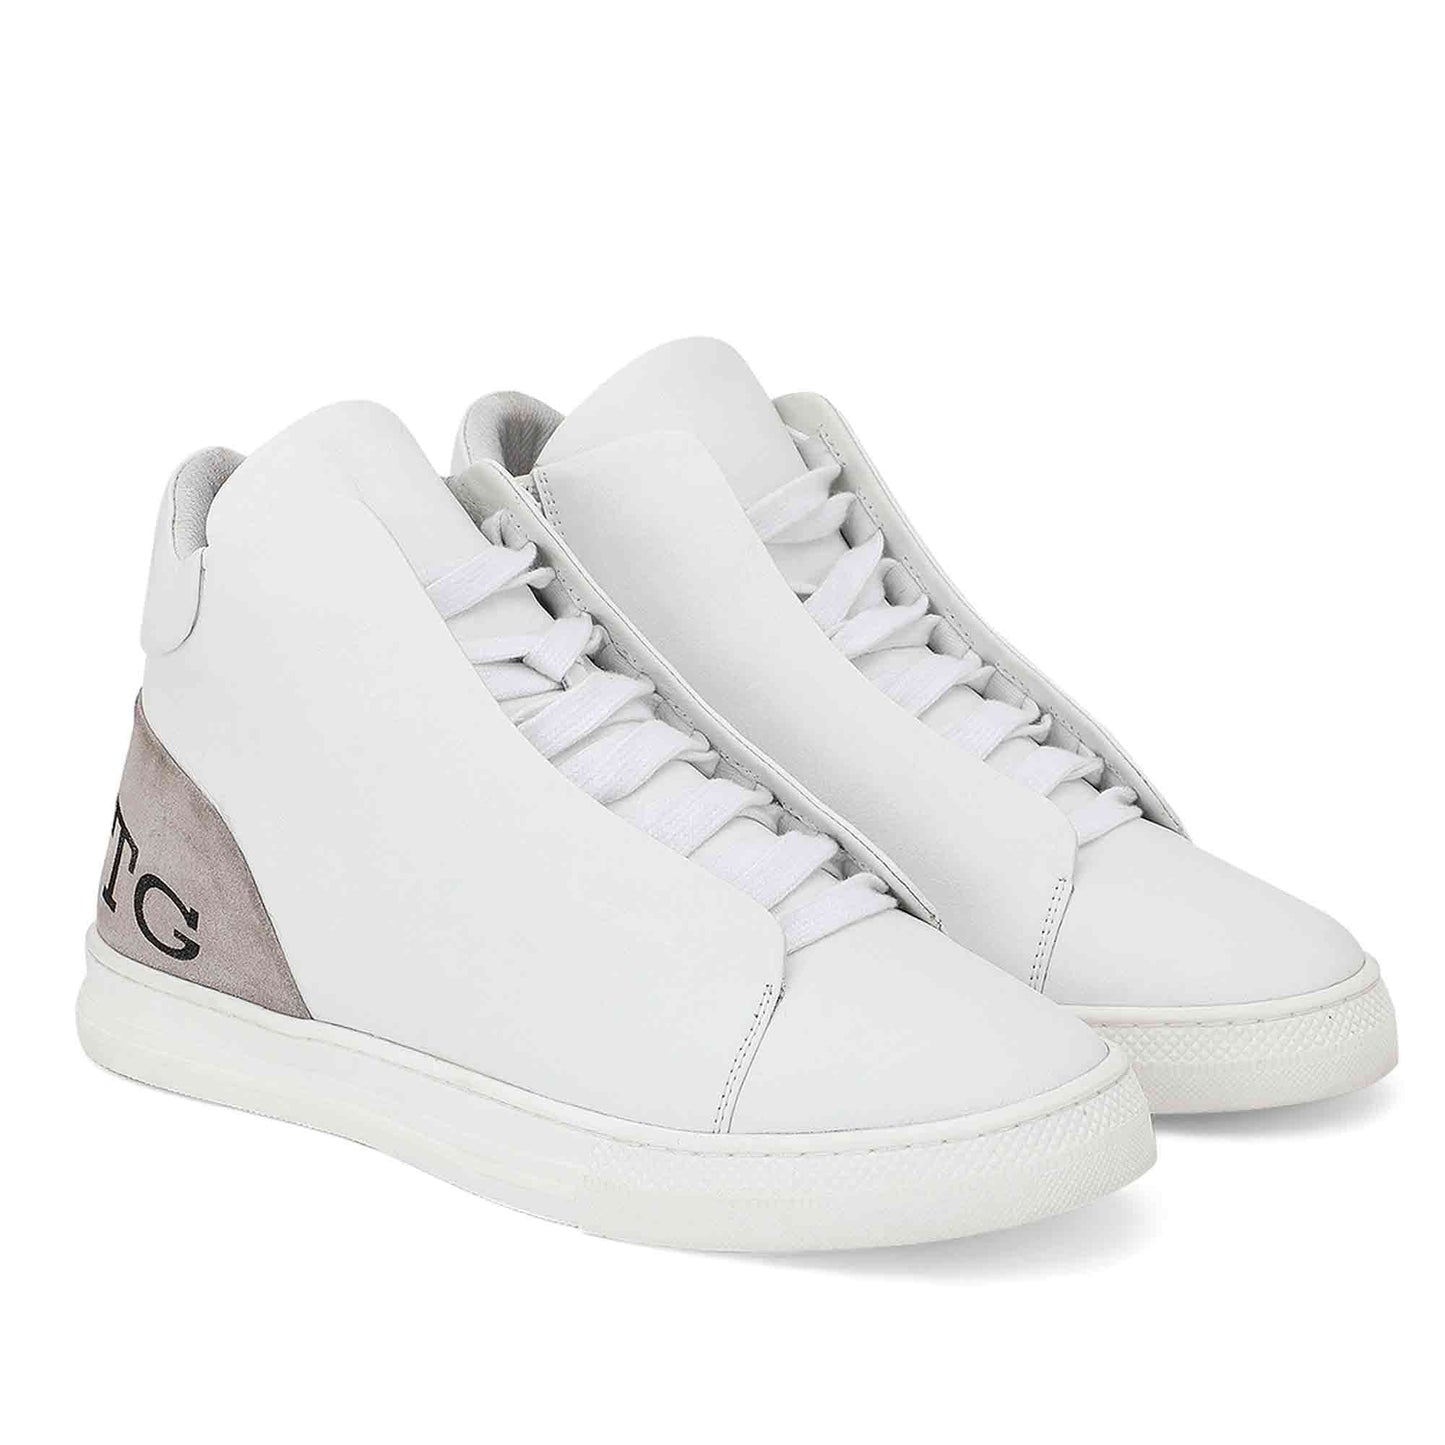 Whitesta Milo White Leather Handcrafted Sneakers